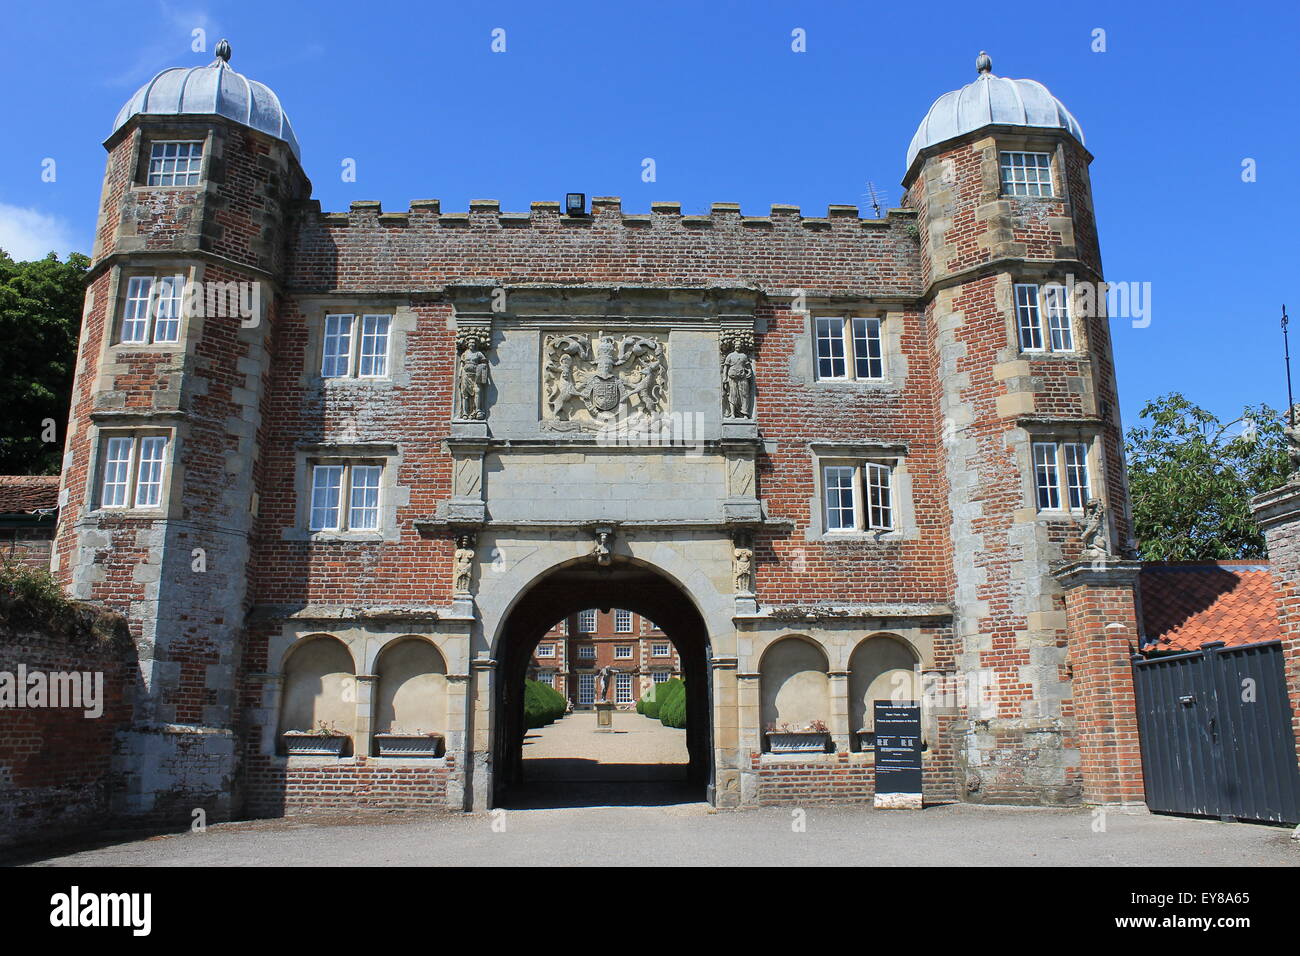 Front of the gatehouse at Burton Agnes Hall, near Driffield, East Riding of Yorkshire, England, UK Stock Photo